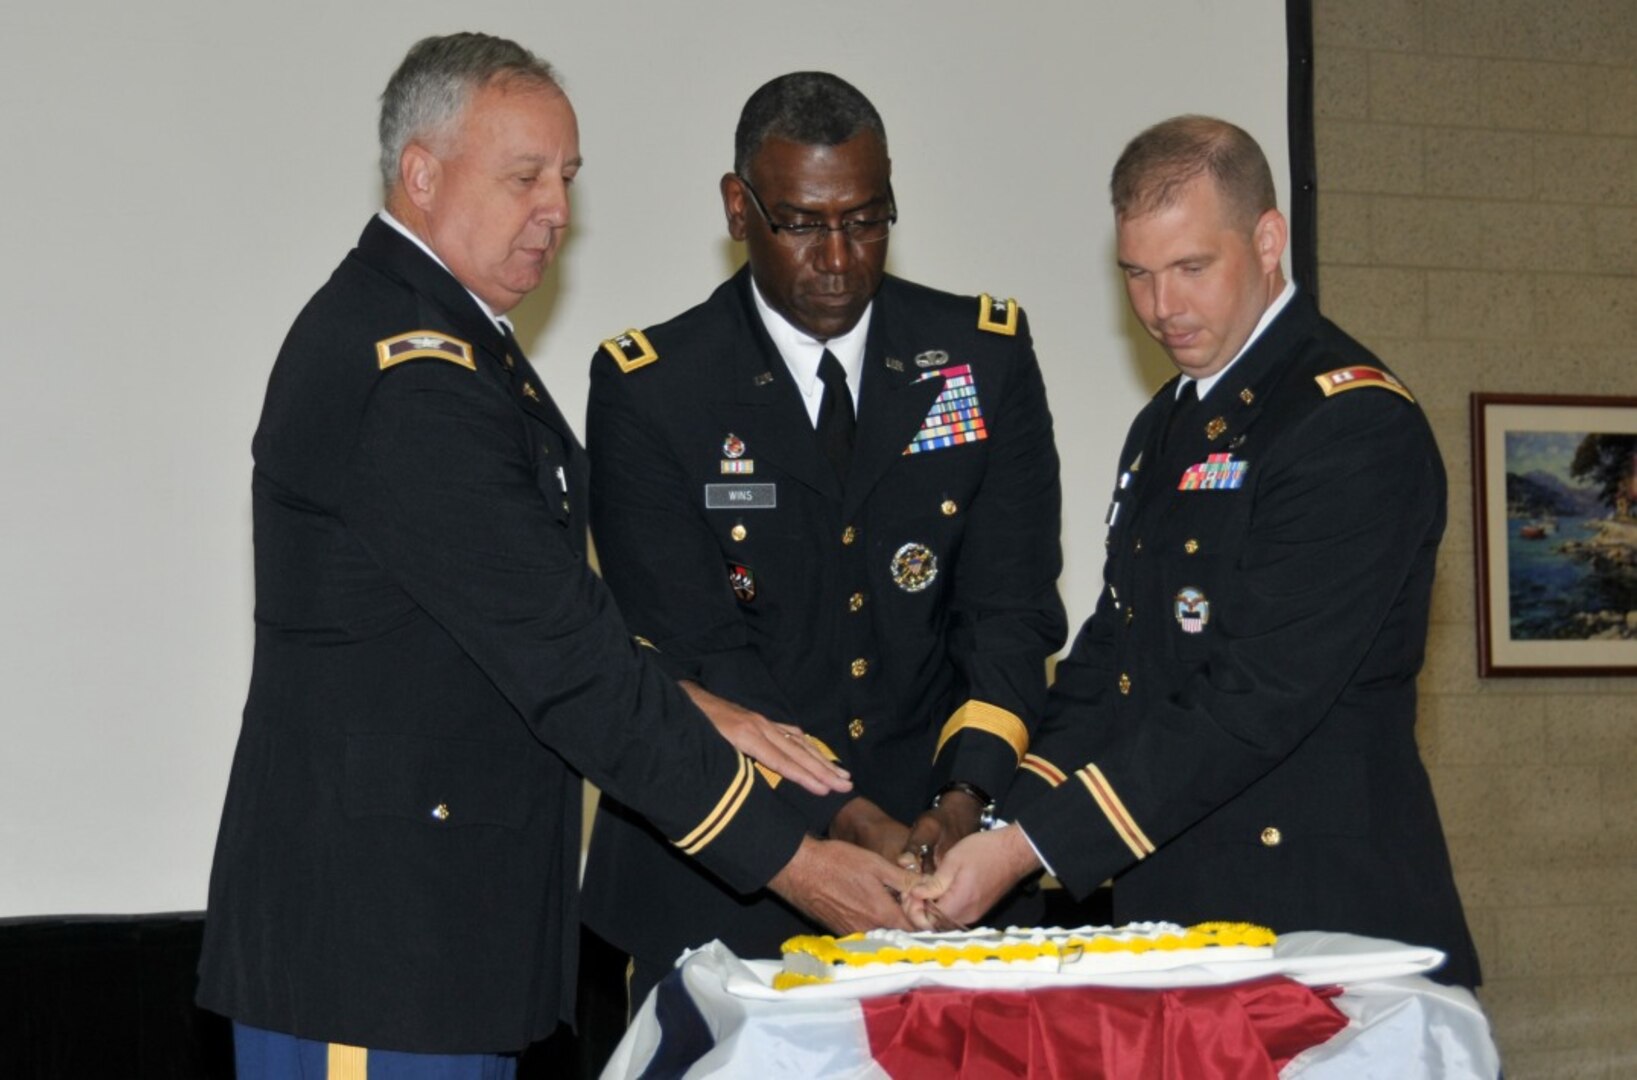 Maj. Gen. Cedric T. Wins, center, director, Force Development Office of the Deputy Chief of Staff, is flanked by Col. Brad Hildabrand, left, and Capt. Zach Palko as they cut the cake at the 241st Army Birthday celebration at the McNamara Headquarters Complex June 9. Hildabrand was the oldest soldier at the ceremony, while Palko was the youngest.